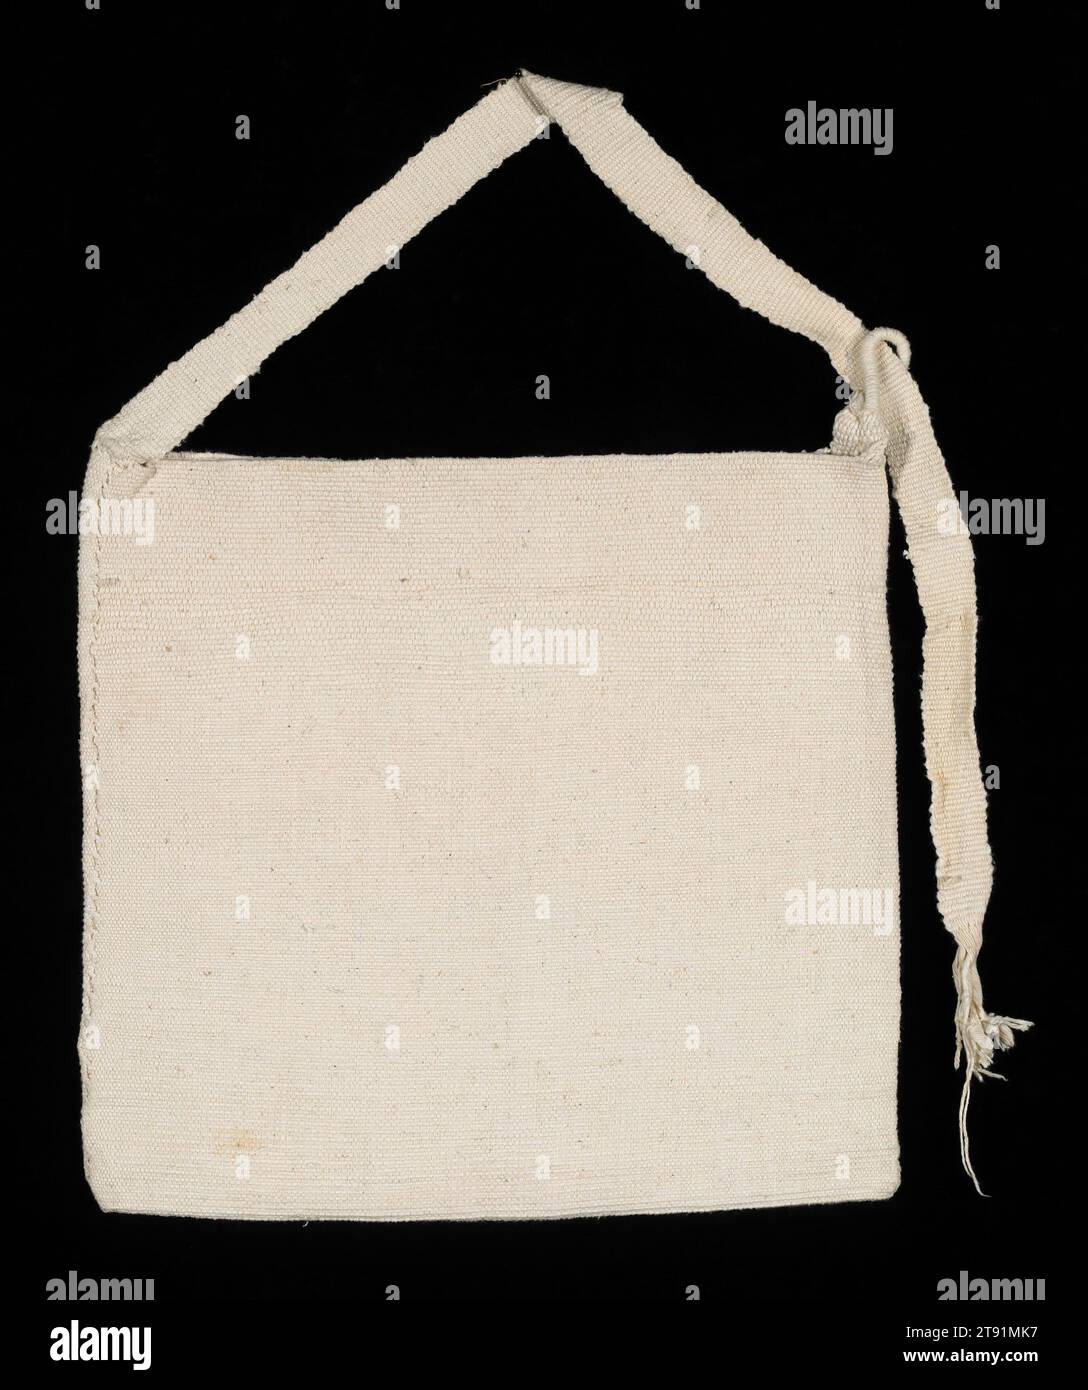 Man's bag, 20th century, 14 3/4 x 13 3/4 in. (37.5 x 34.93 cm)32 x 1 in. (81.28 x 2.54 cm) (object part, strap), Cotton; knitting, weaving, Guatemala, 20th century, Men in Chichicastenango no longer wear traje as everyday clothing, but their ceremonial traje is among the most spectacular in the Guatemala highlands. Loosely patterned after a Spanish matador's costume, the heavy woolen jacket and pants are opulently embroidered in silk or sedalina (synthetic silk) floss. One large red tzute is carefully arranged as a head covering, while additional tzutes may be worn over the shoulders Stock Photo